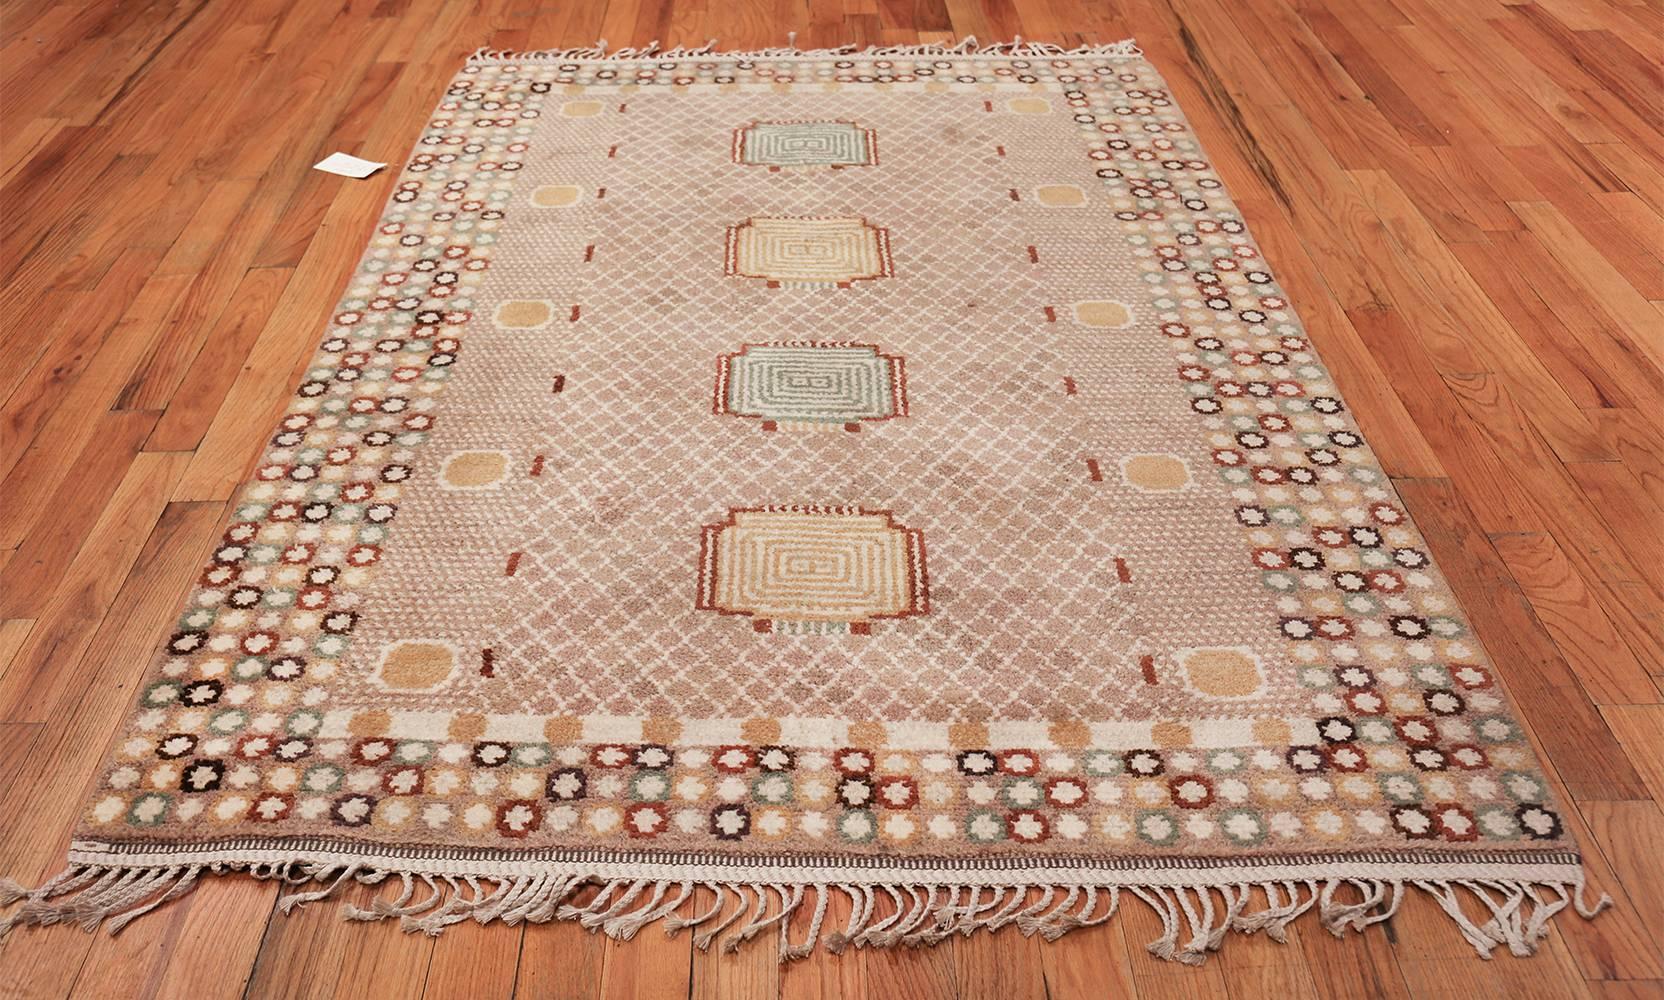 Hand-Knotted Vintage Marta Maas Scandinavian Rug by Barbro Nilsson. Size: 5' 1